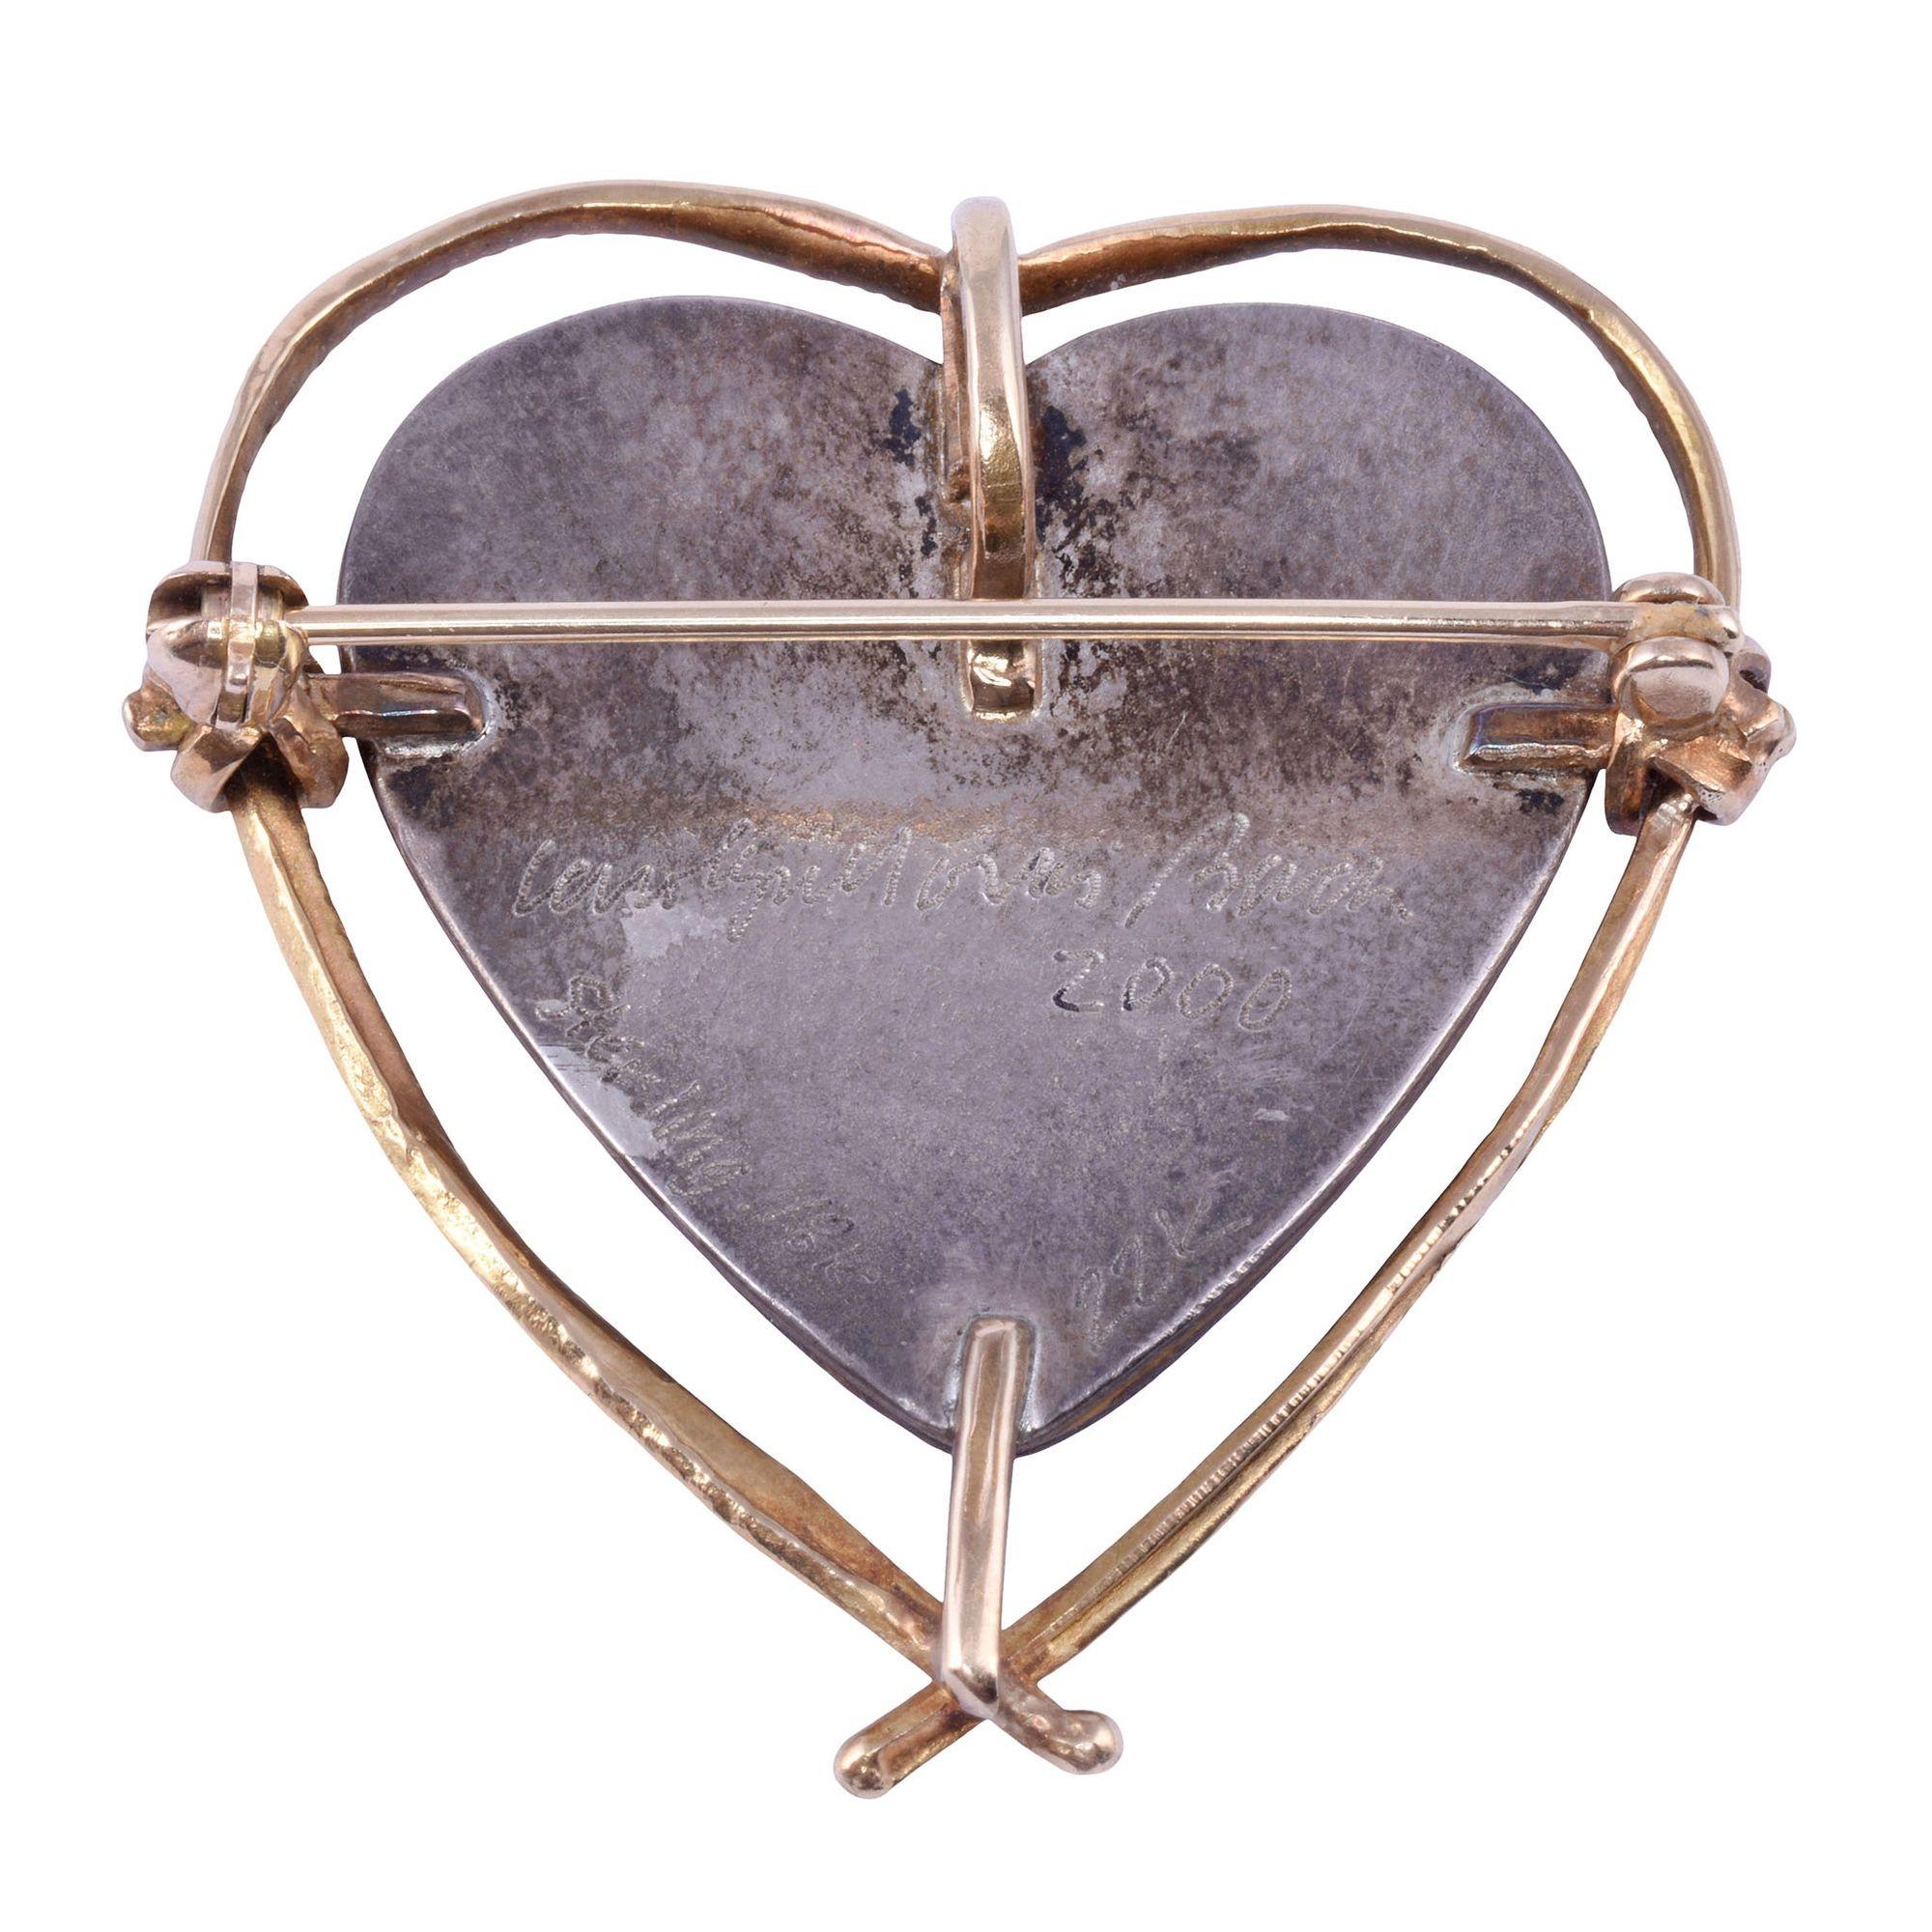 Estate Carolyn Morris Bach heart brooch or pendant, dated 2000. This brooch is crafted in 18-22 karat gold and sterling silver by Carolyn Morris Bach. The designer pin feature a heart shaped cut stone. The estate heart pin weighs 10.7 grams. [SJ